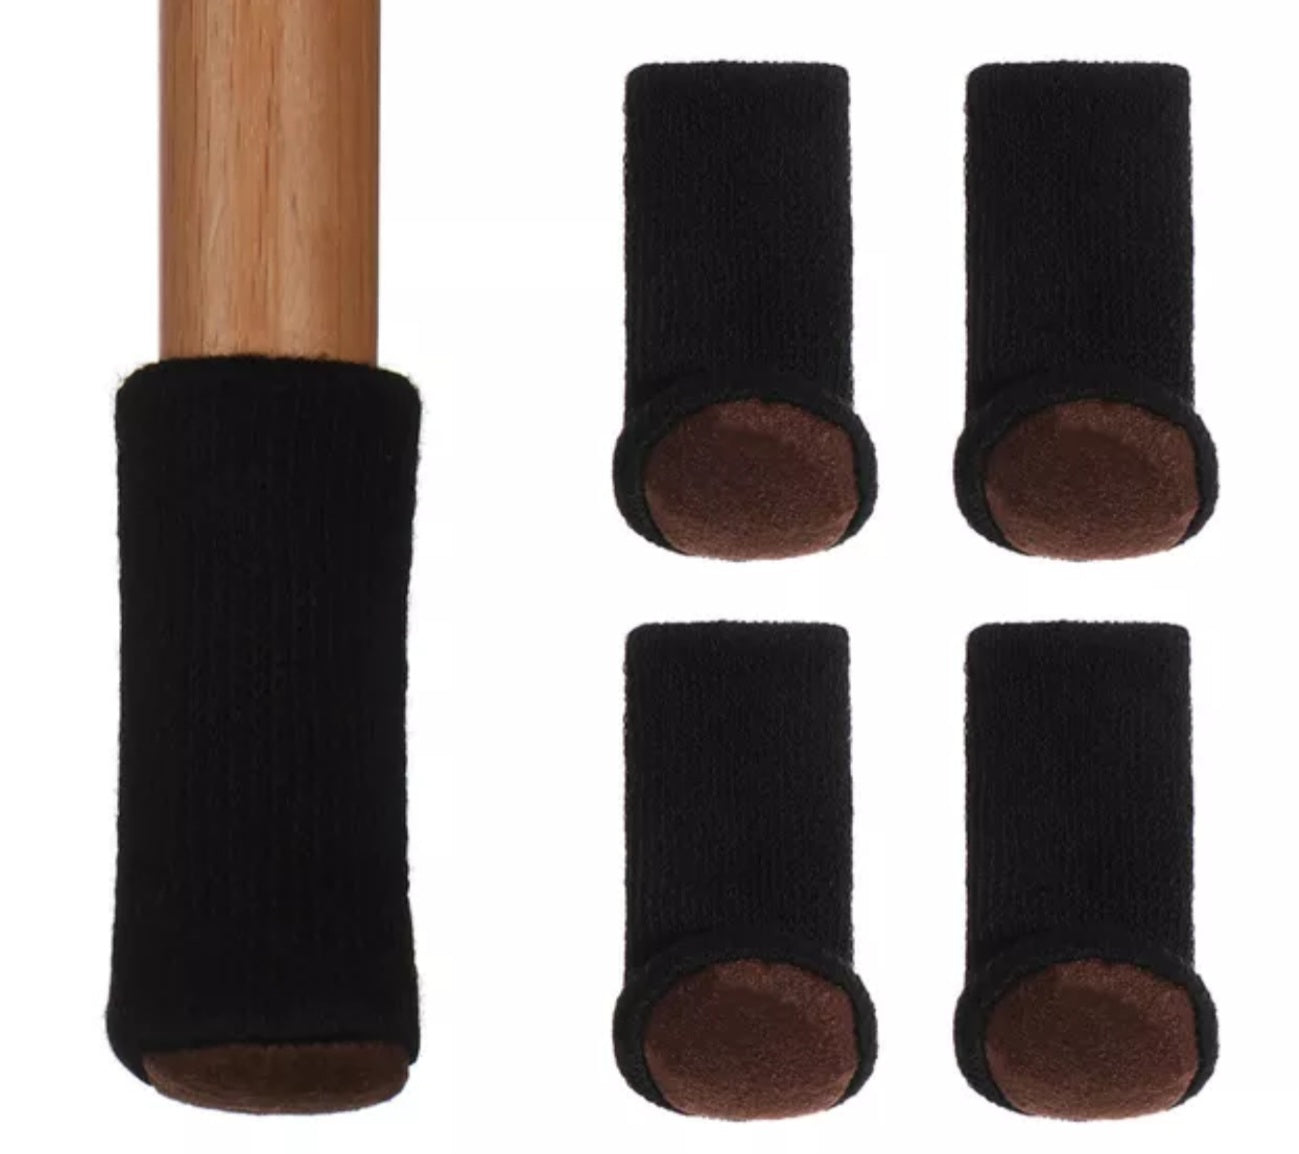 Chair and table leg socks scratch protection plain colour set of 4